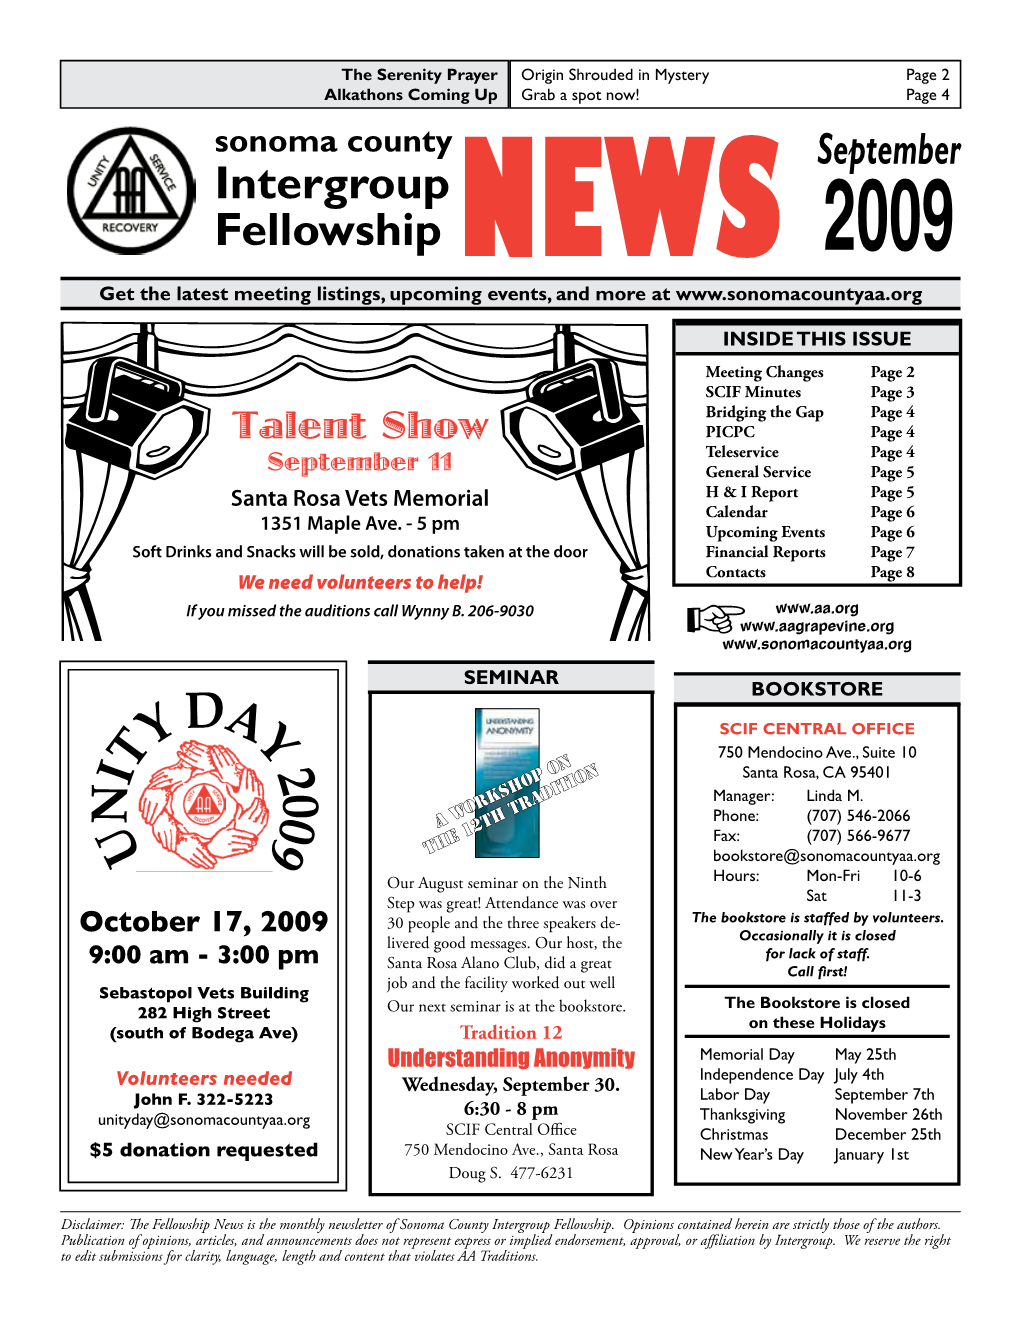 September Intergroup Fellowship NEWS 2009 Get the Latest Meeting Listings, Upcoming Events, and More At